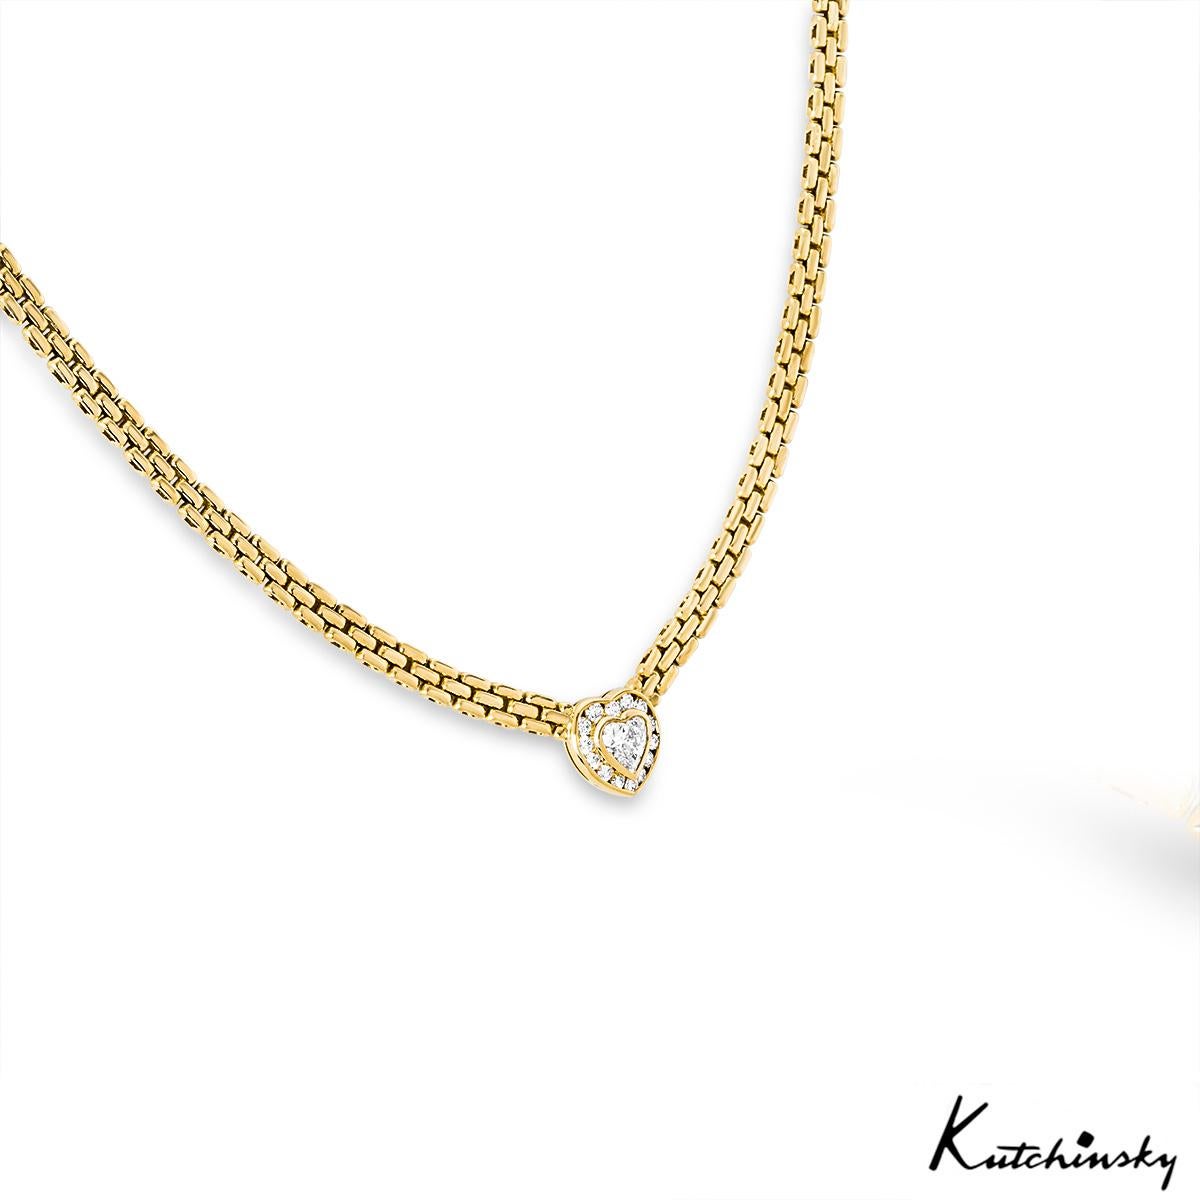 A beautiful 18k yellow gold diamond necklace by Kutchinsky. The necklace is bezel set to the centre with a heart shaped diamond weighing approximately 1.00ct, G-H colour and VS clarity. The centre stone is further complemented with 14 round